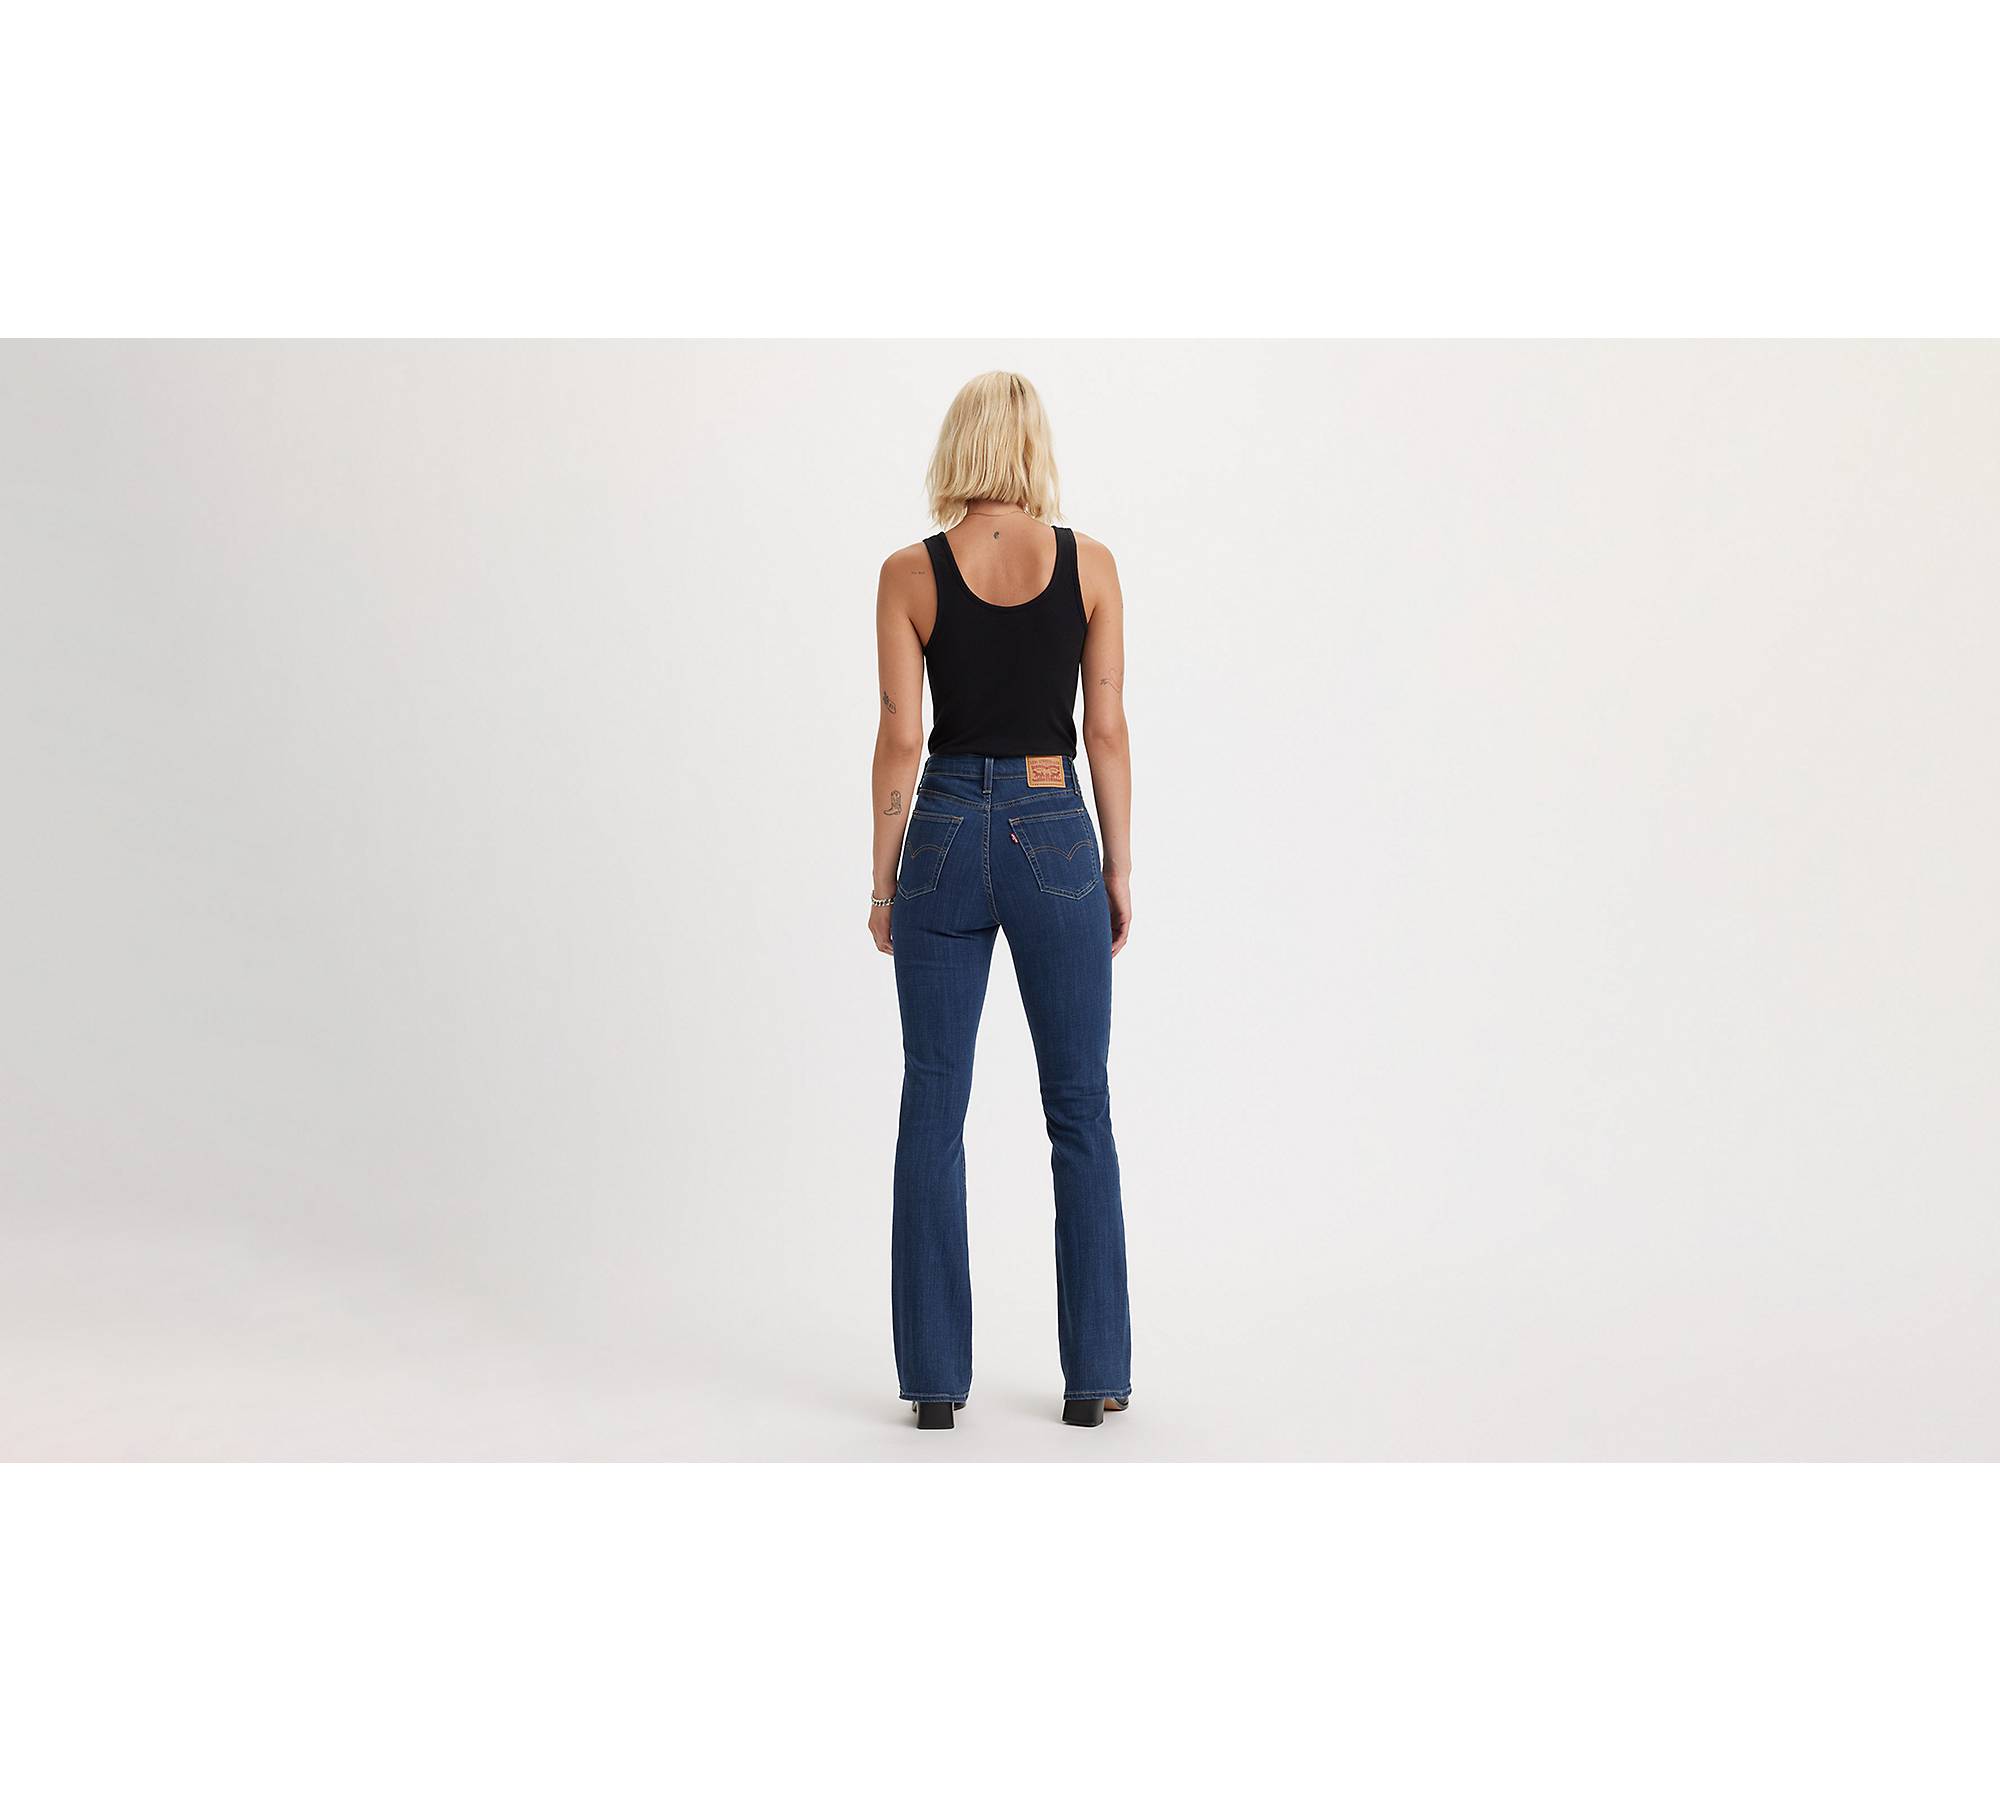 Womens Bootcut Jeans - High Waisted & Low Rise